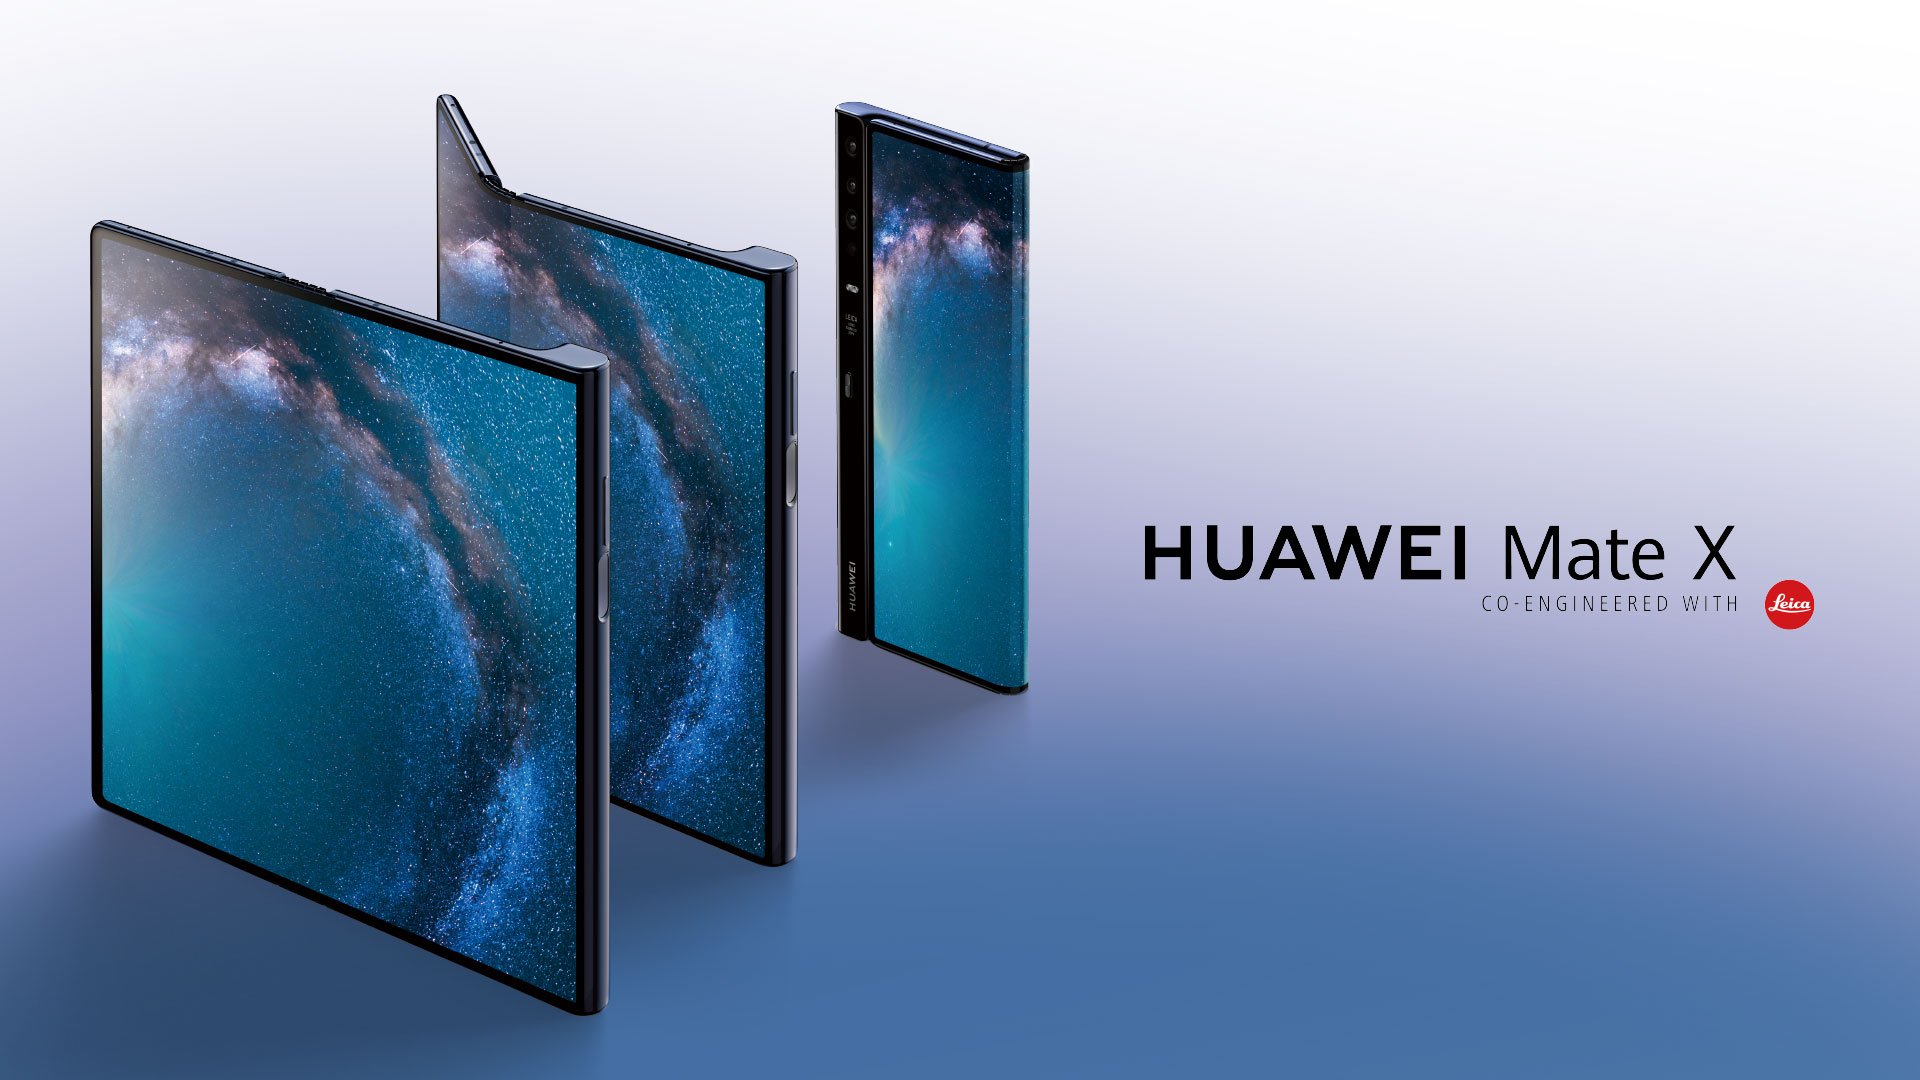 Huawei Mate X users have started receiving the July software update